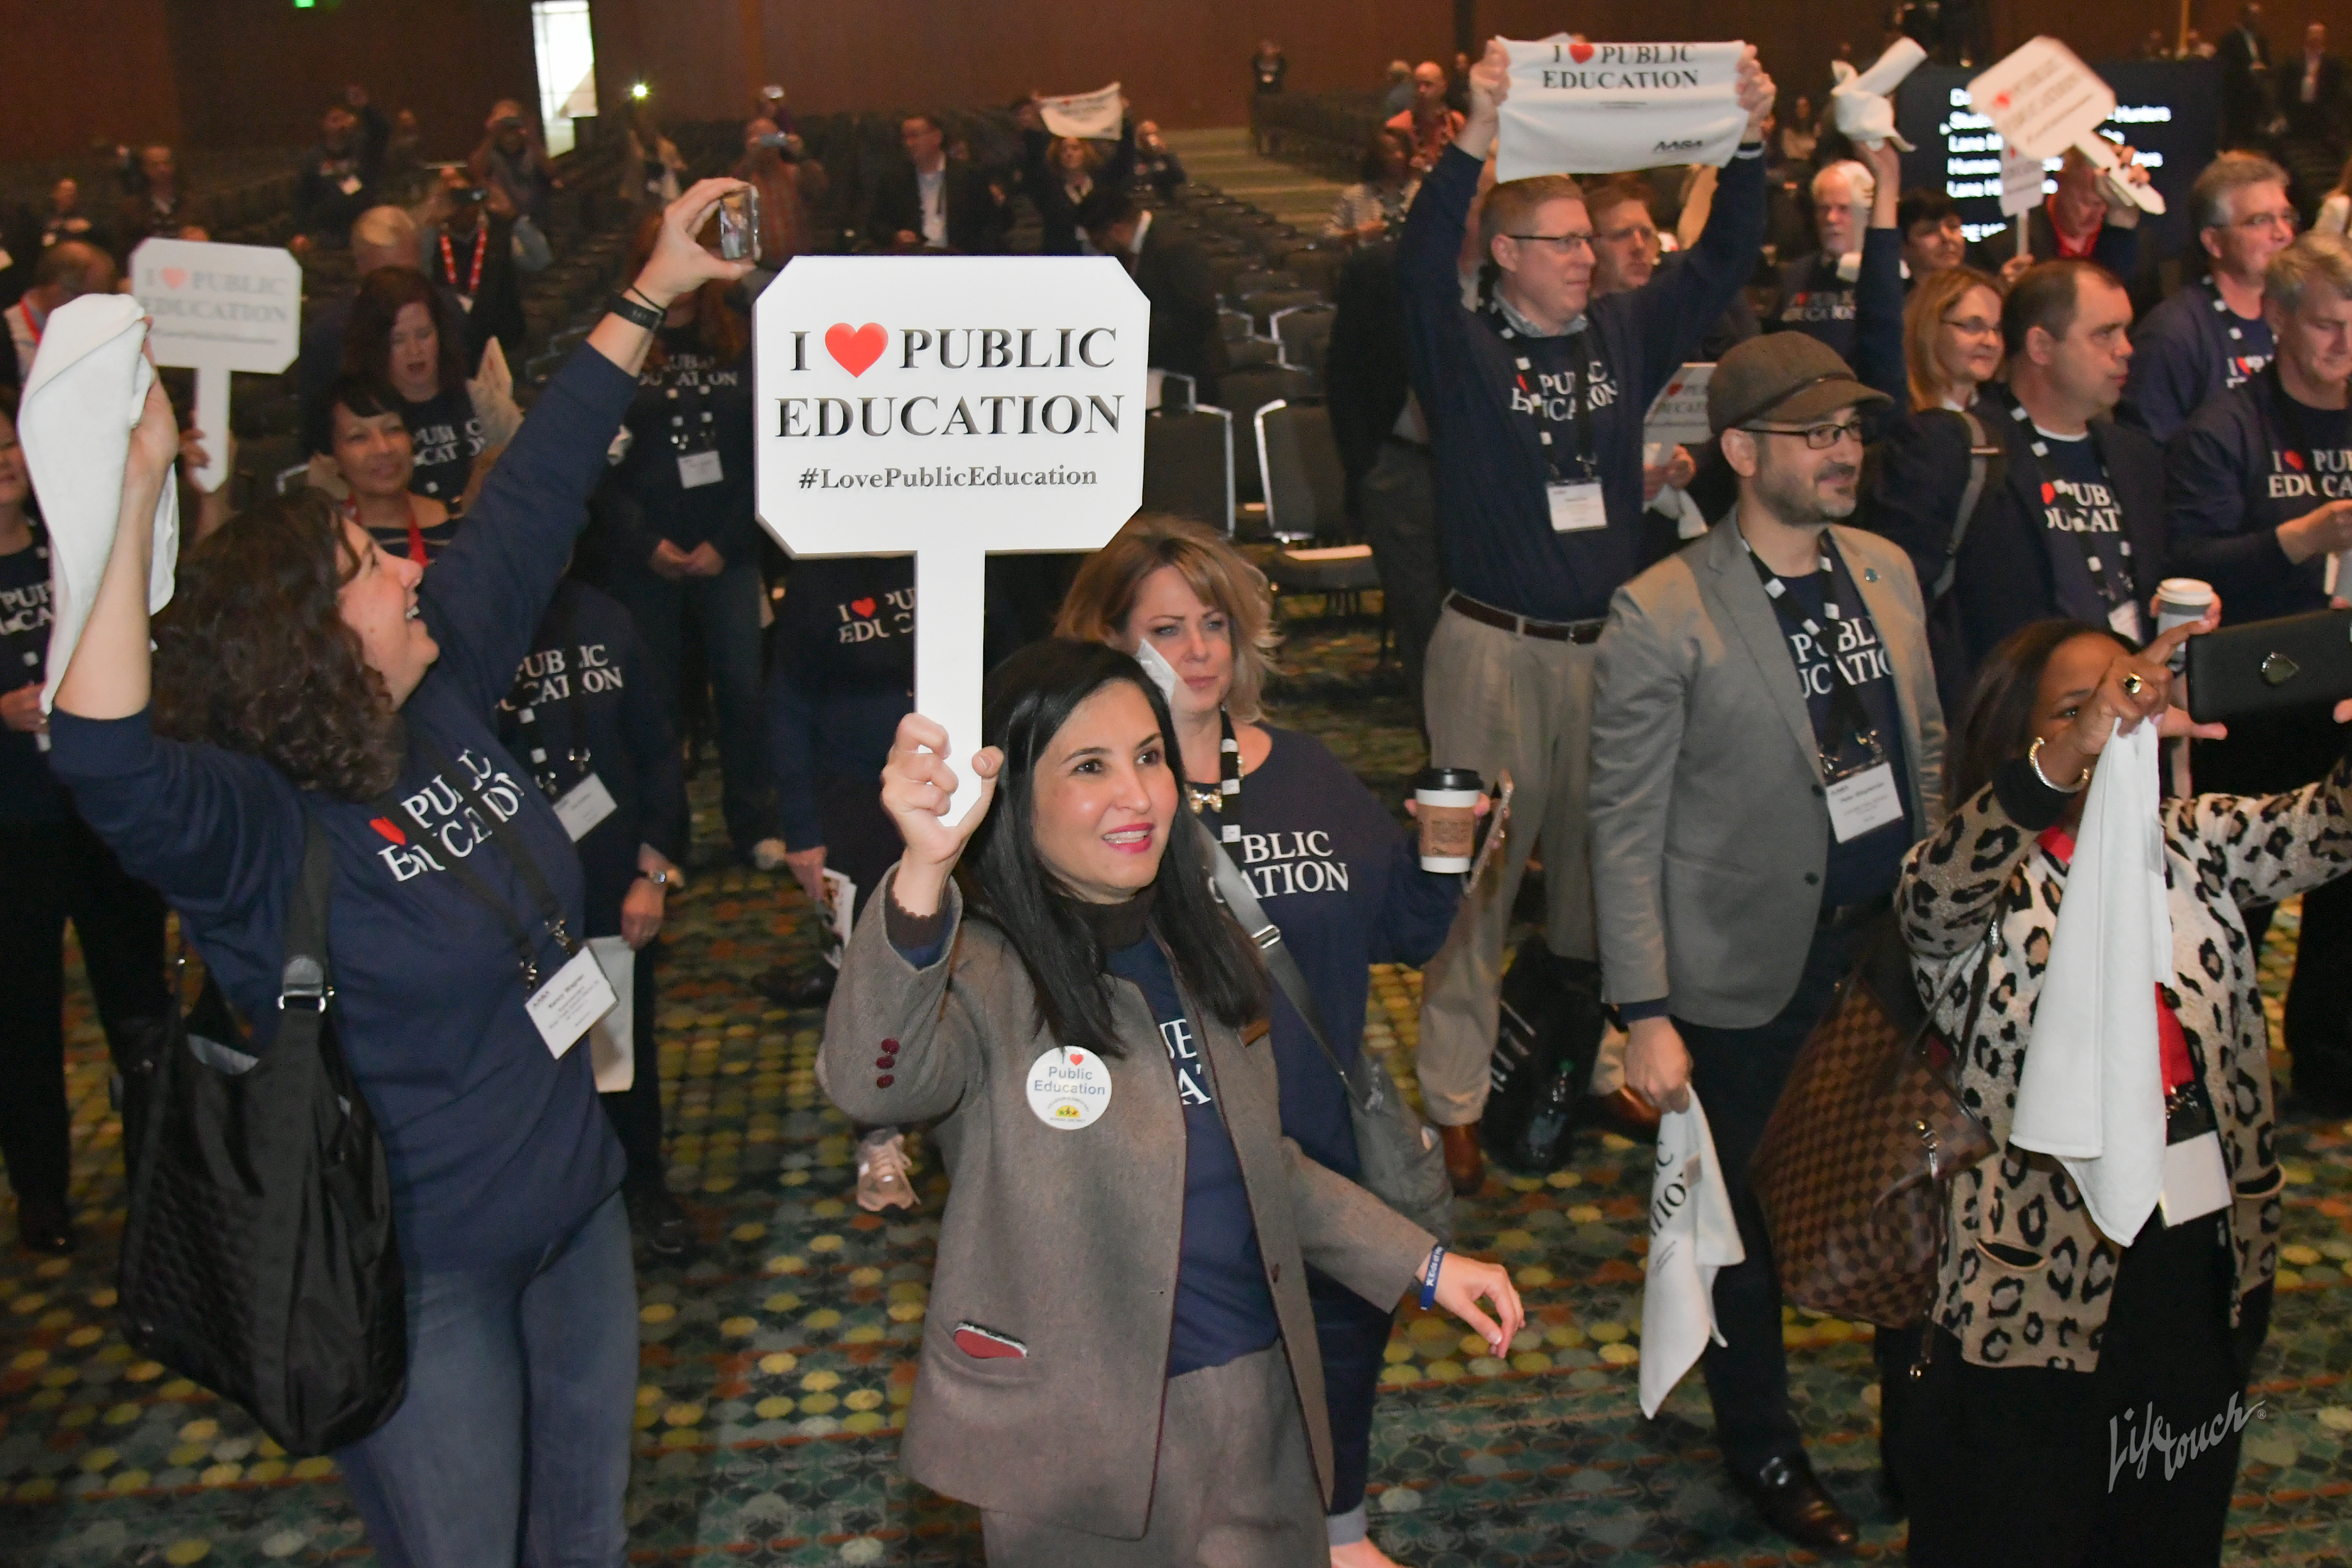 Conference attendees holding I Love Public Education signs